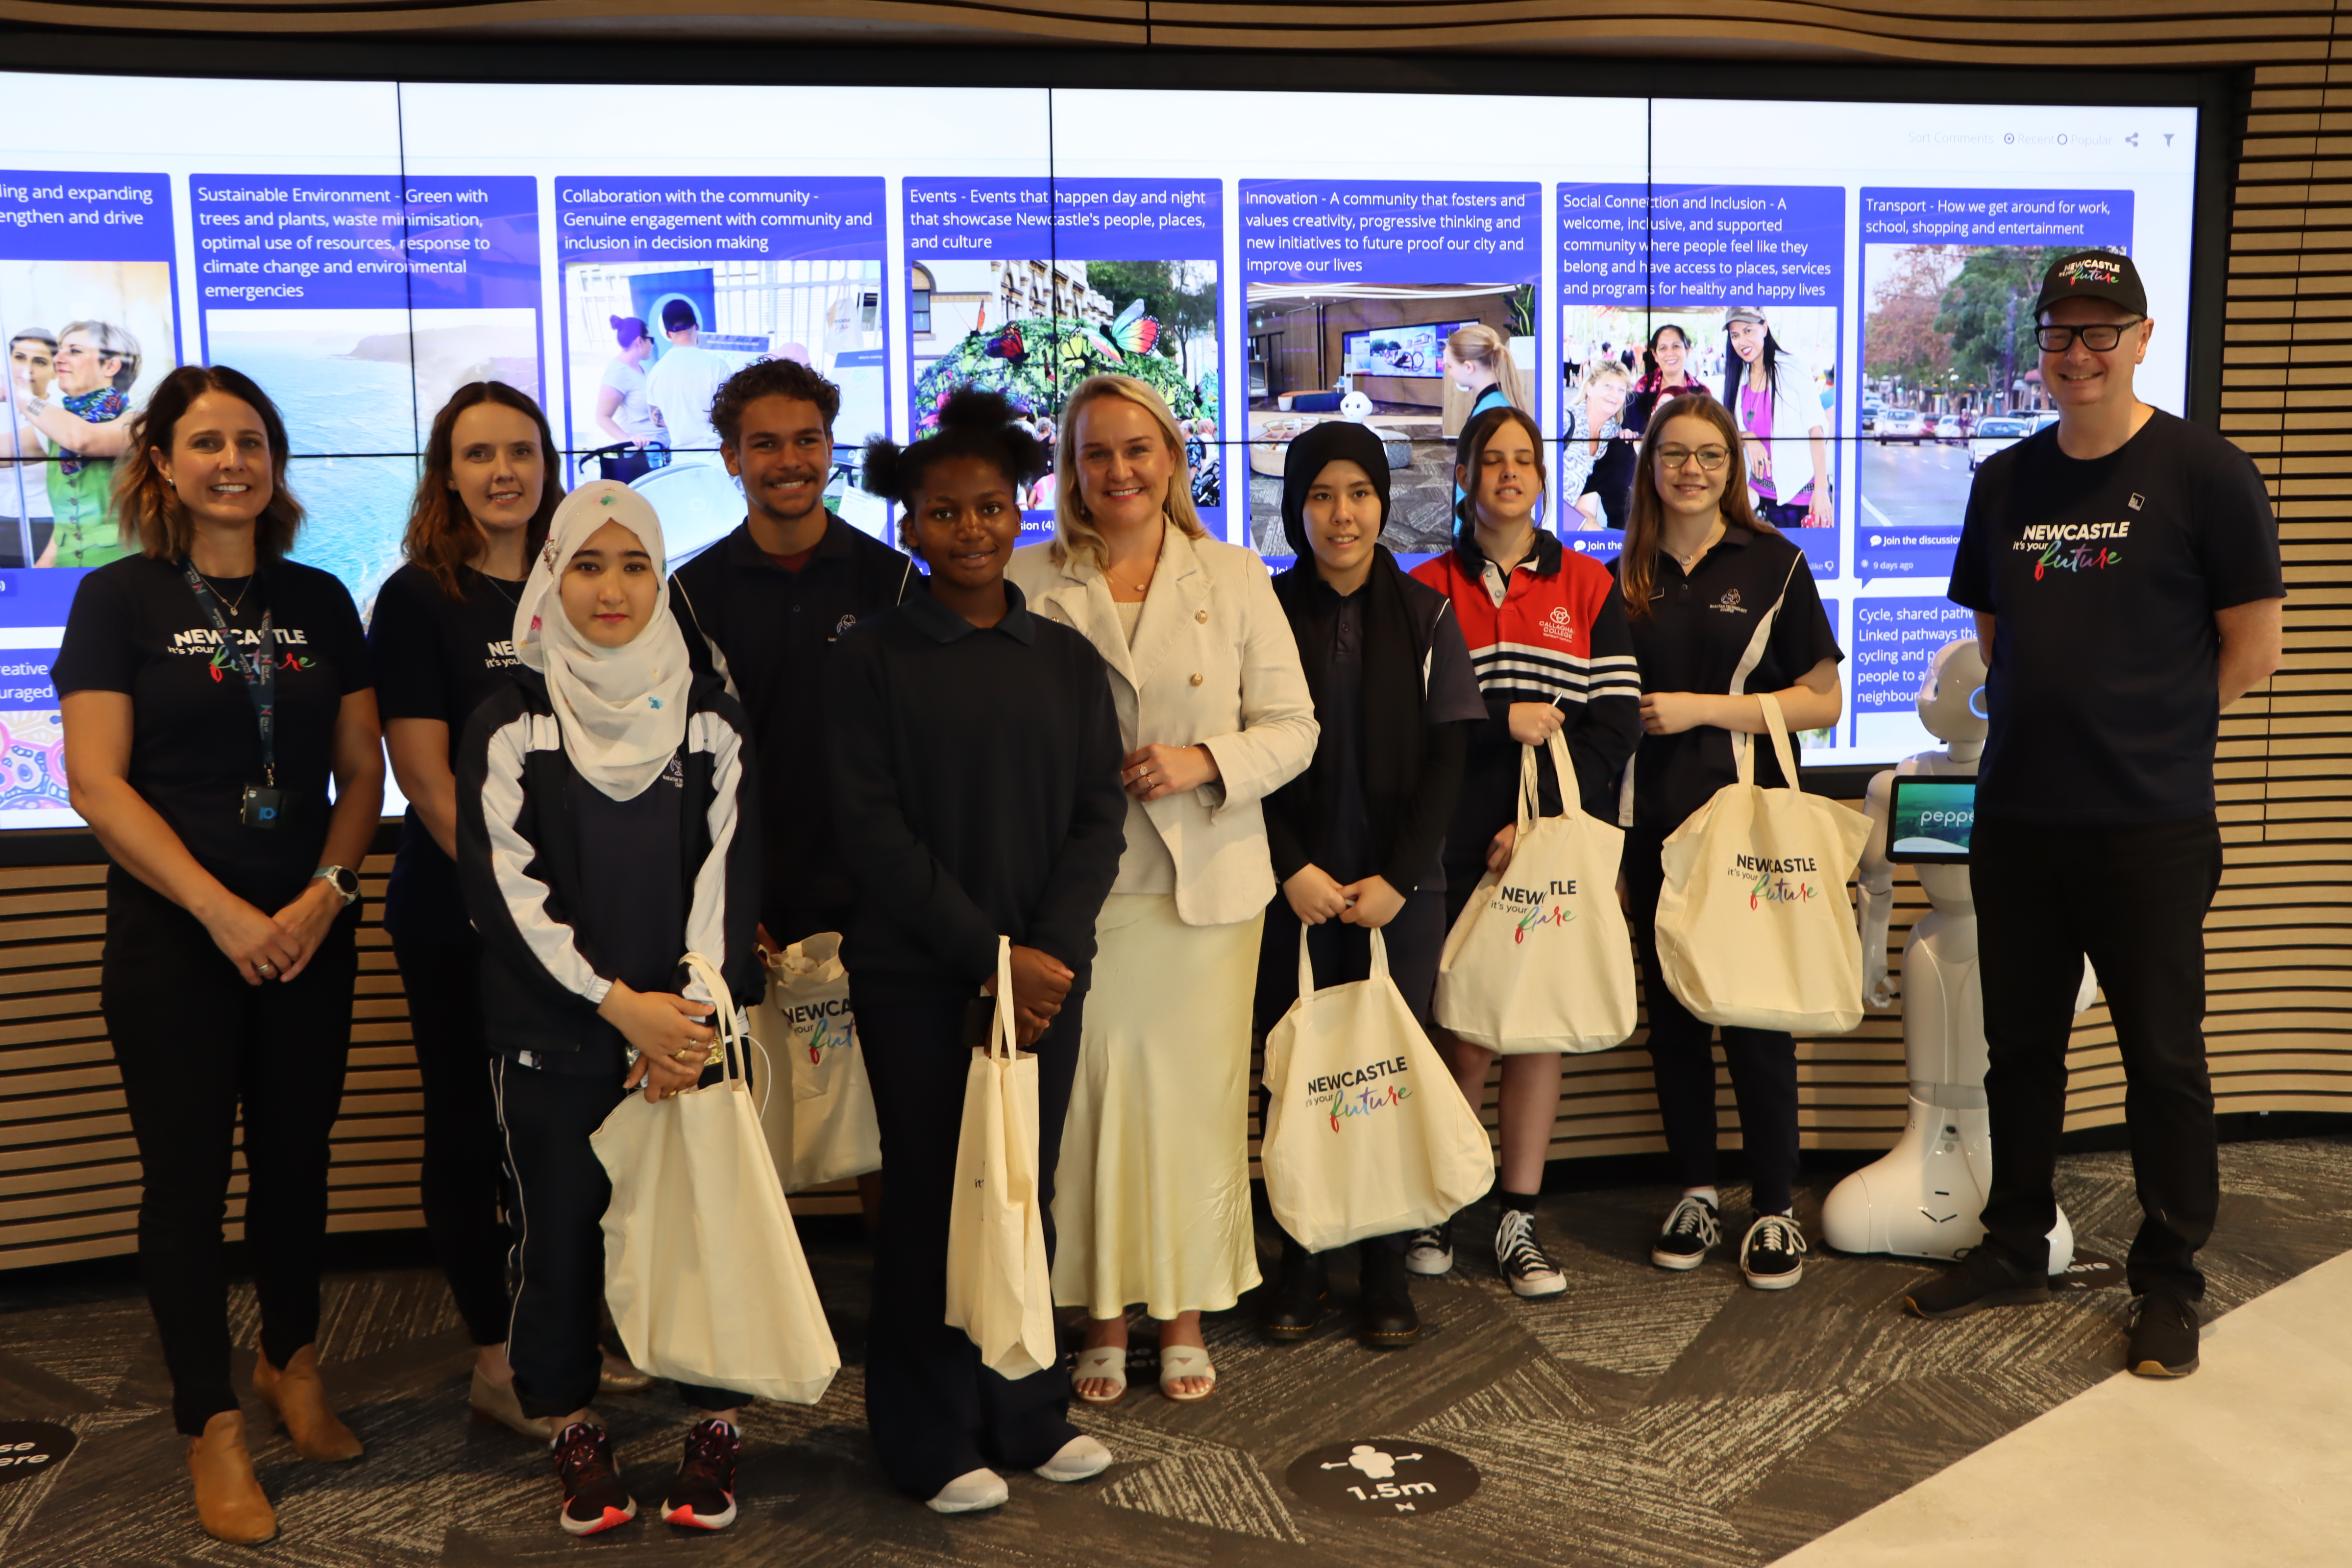 Lord-Mayor-Nuatali-Nelmes-with-students-from-Callaghan-College-Waratah-infront-of-the-digital-vision-wall.JPG